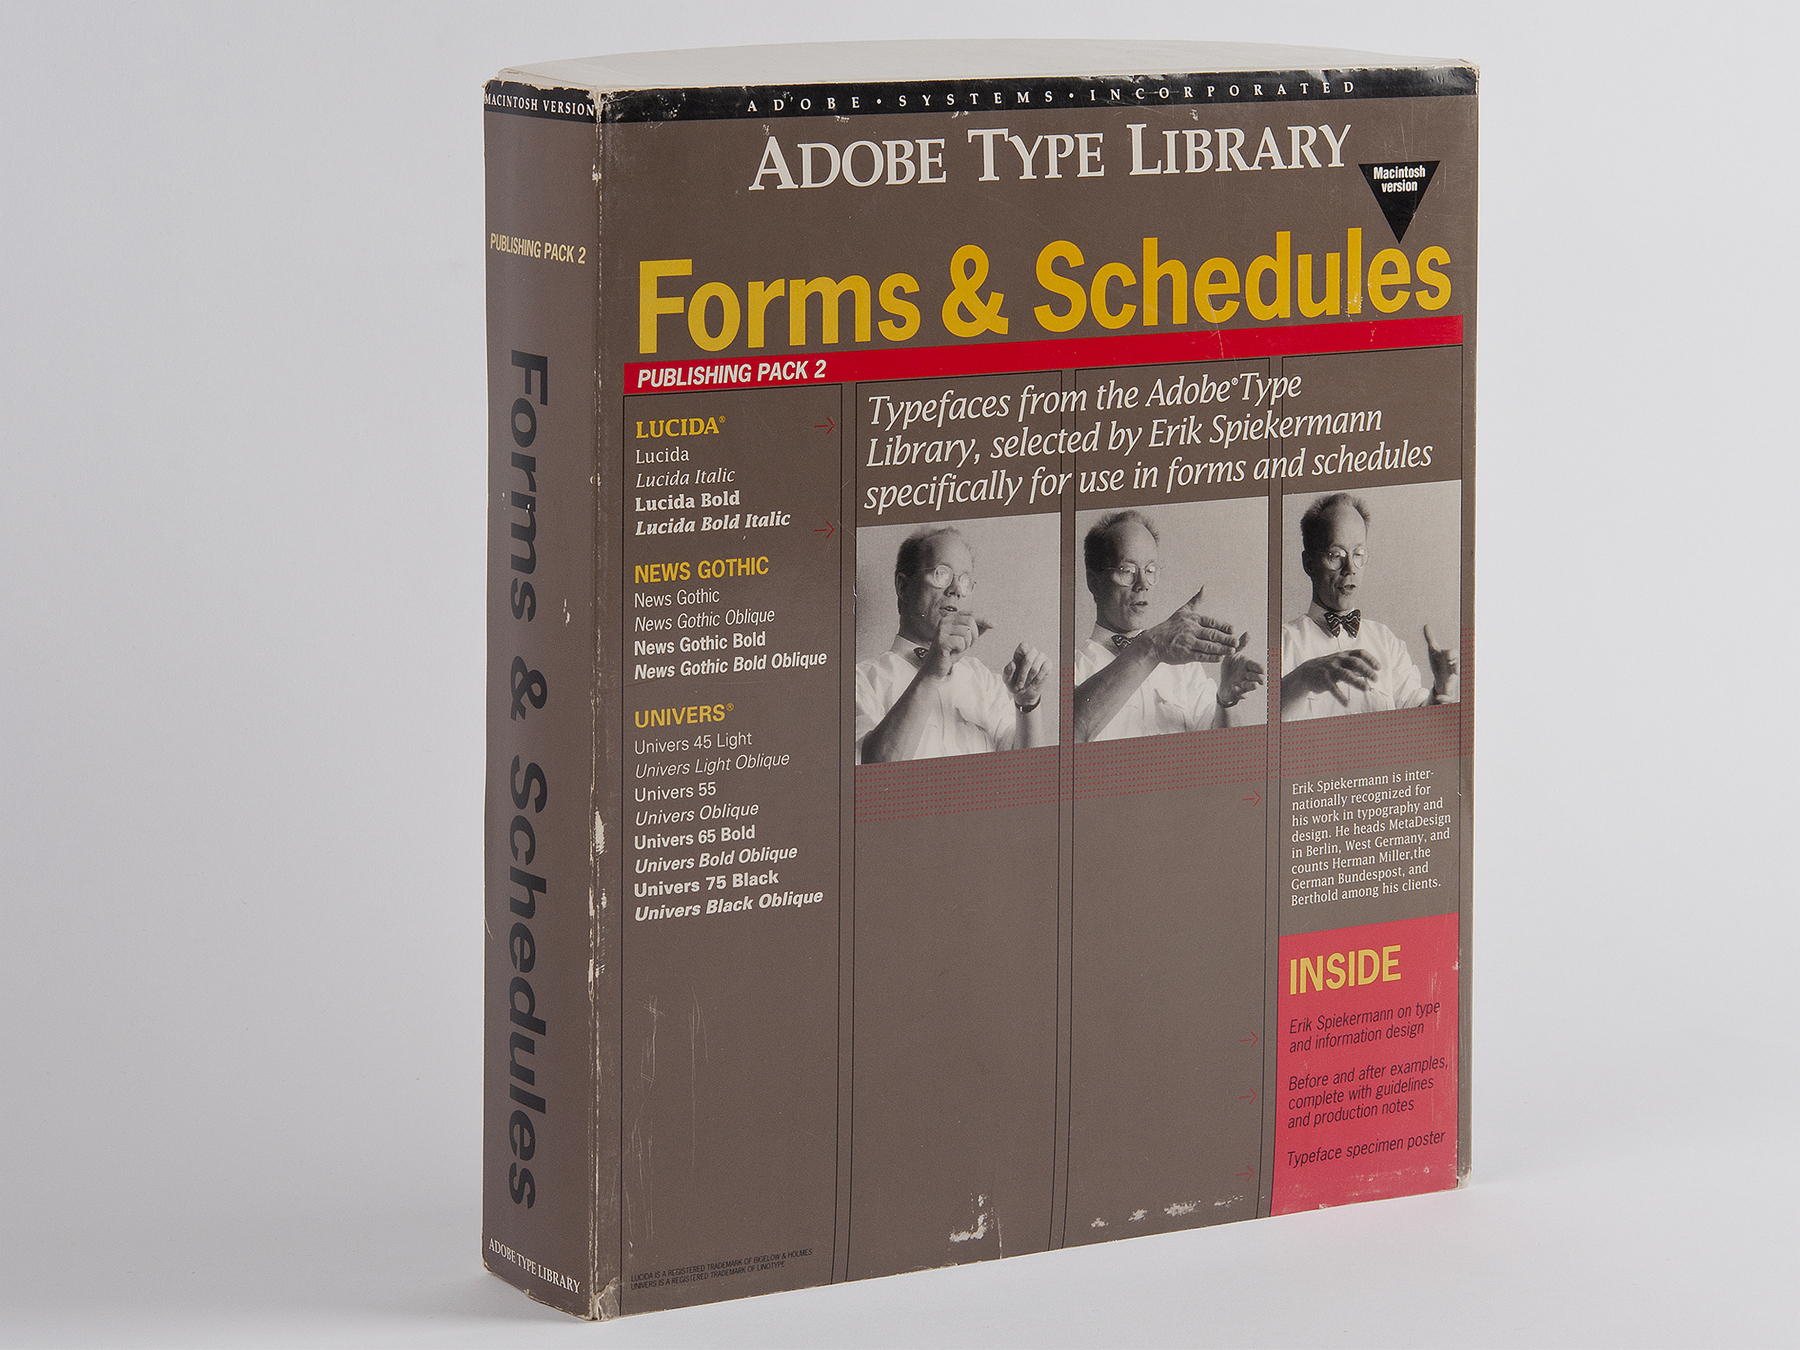 Adobe Publishing Pack curated by Spiekermann, circa 1988.